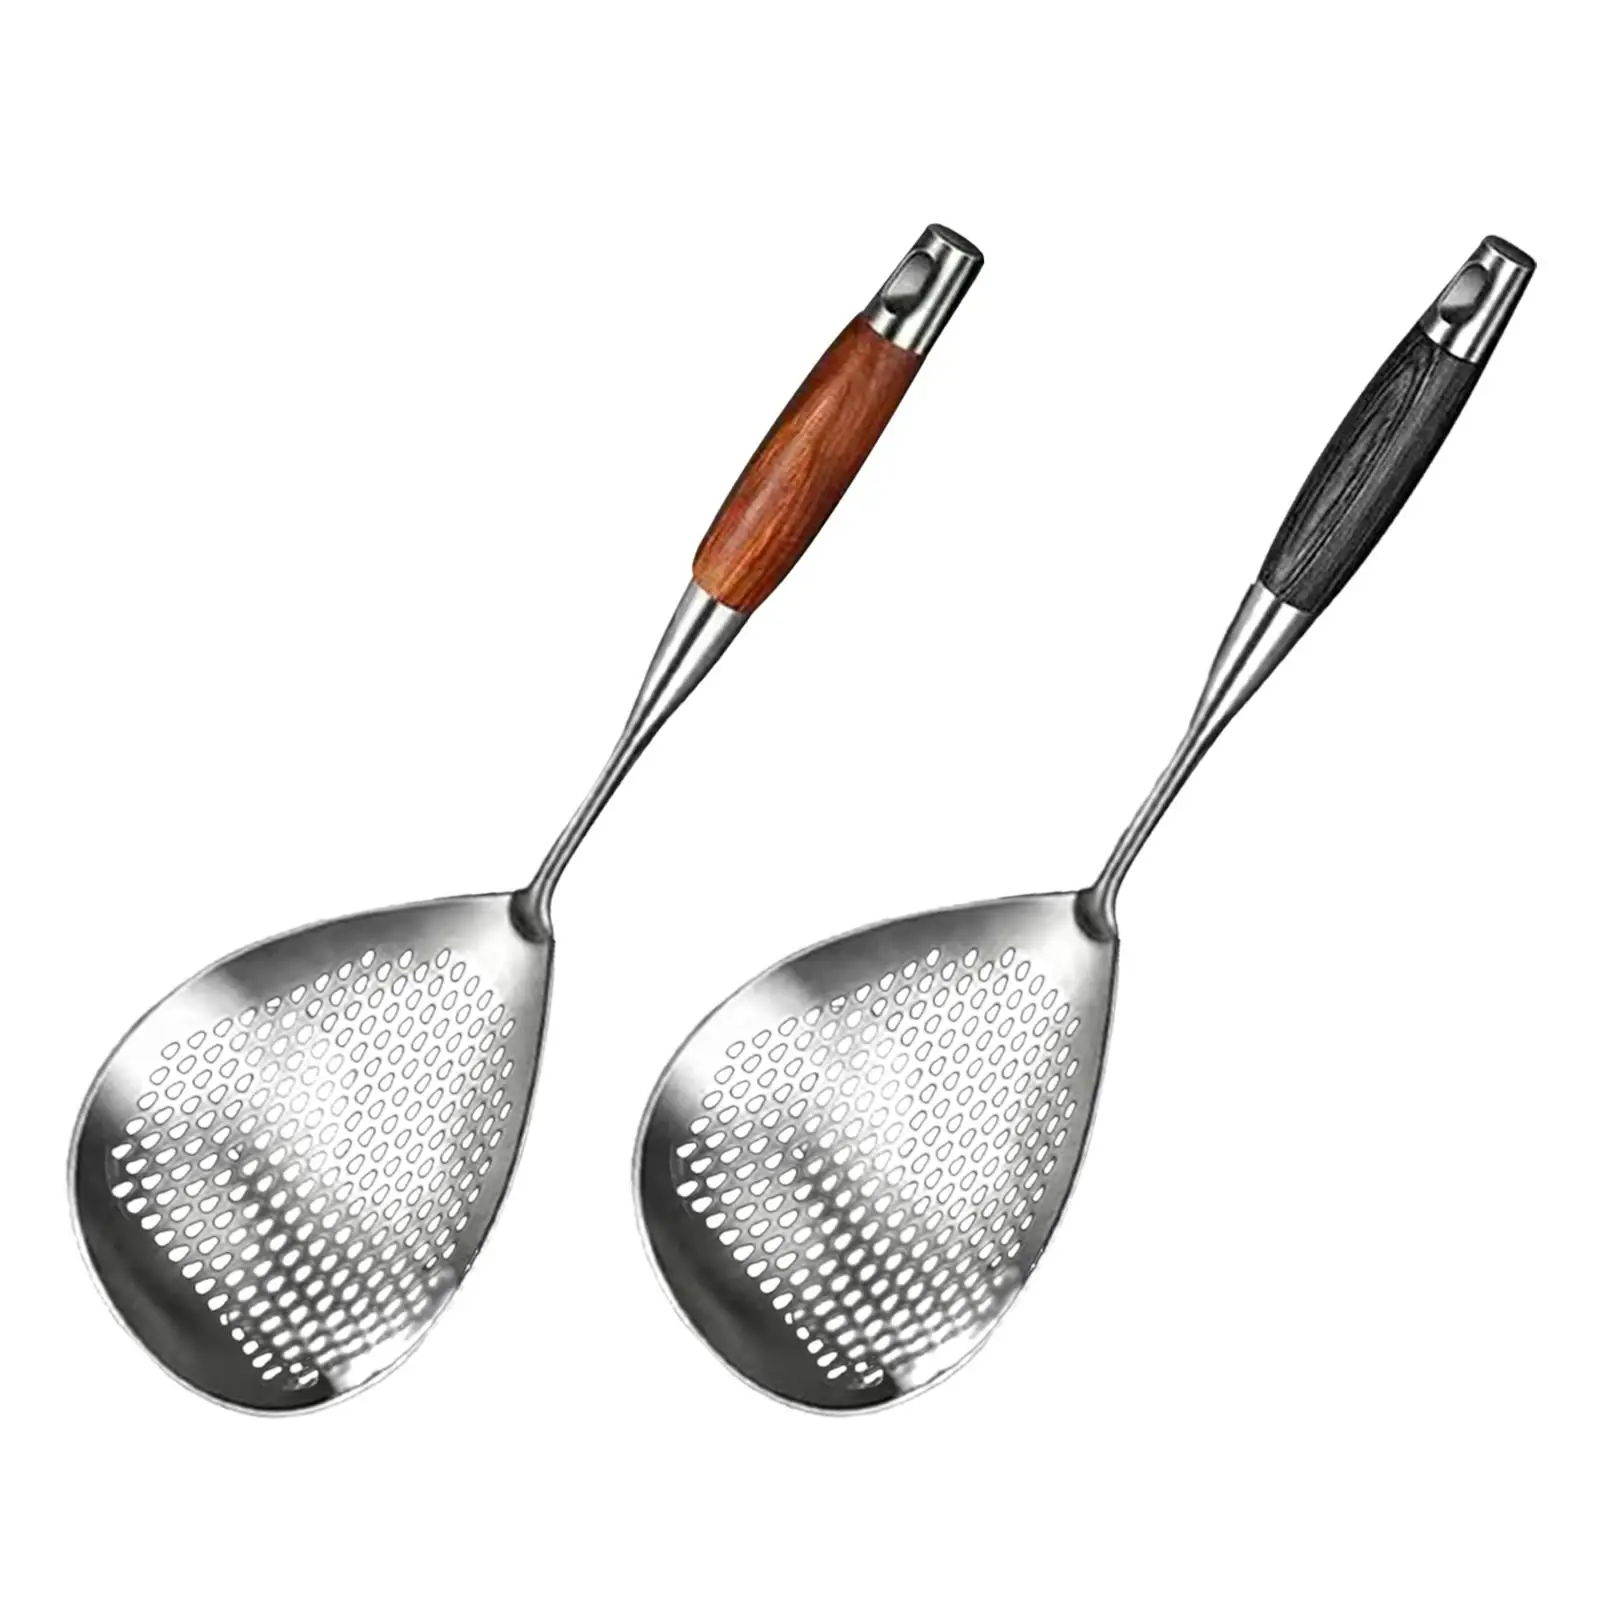 Skimmer Slotted Spoon Cooking Colander Pasta Spaghetti Drain Spoon Frying Spoon for French Fries Frying Cooking Noodles Baking